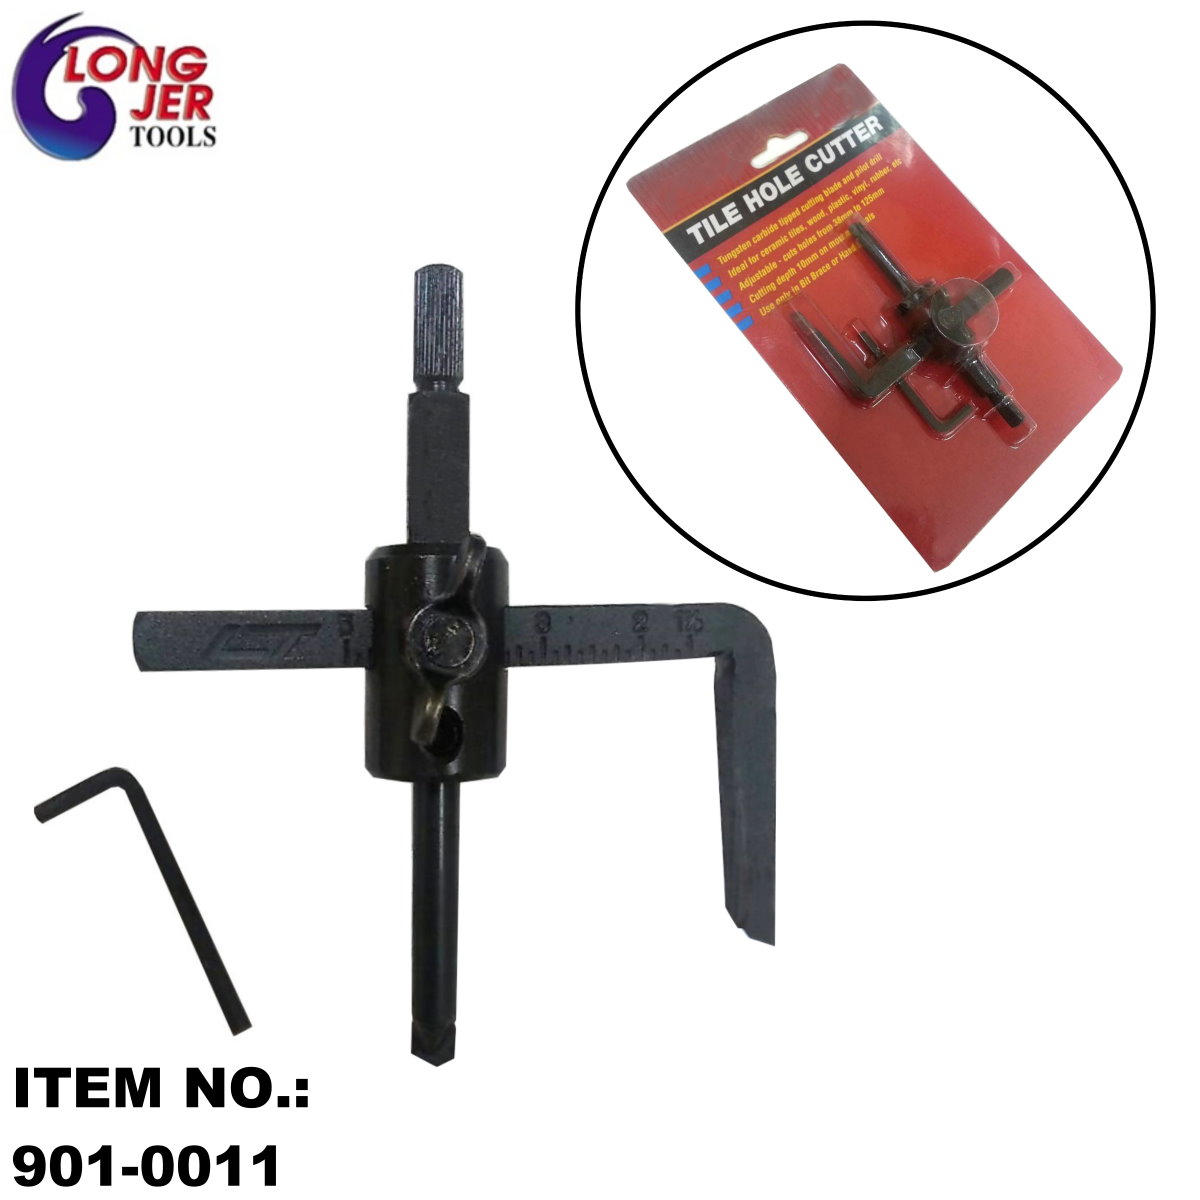 HEAVY DUTY CIRCLE CUTTER FOR TILING CUTTER TOOLS